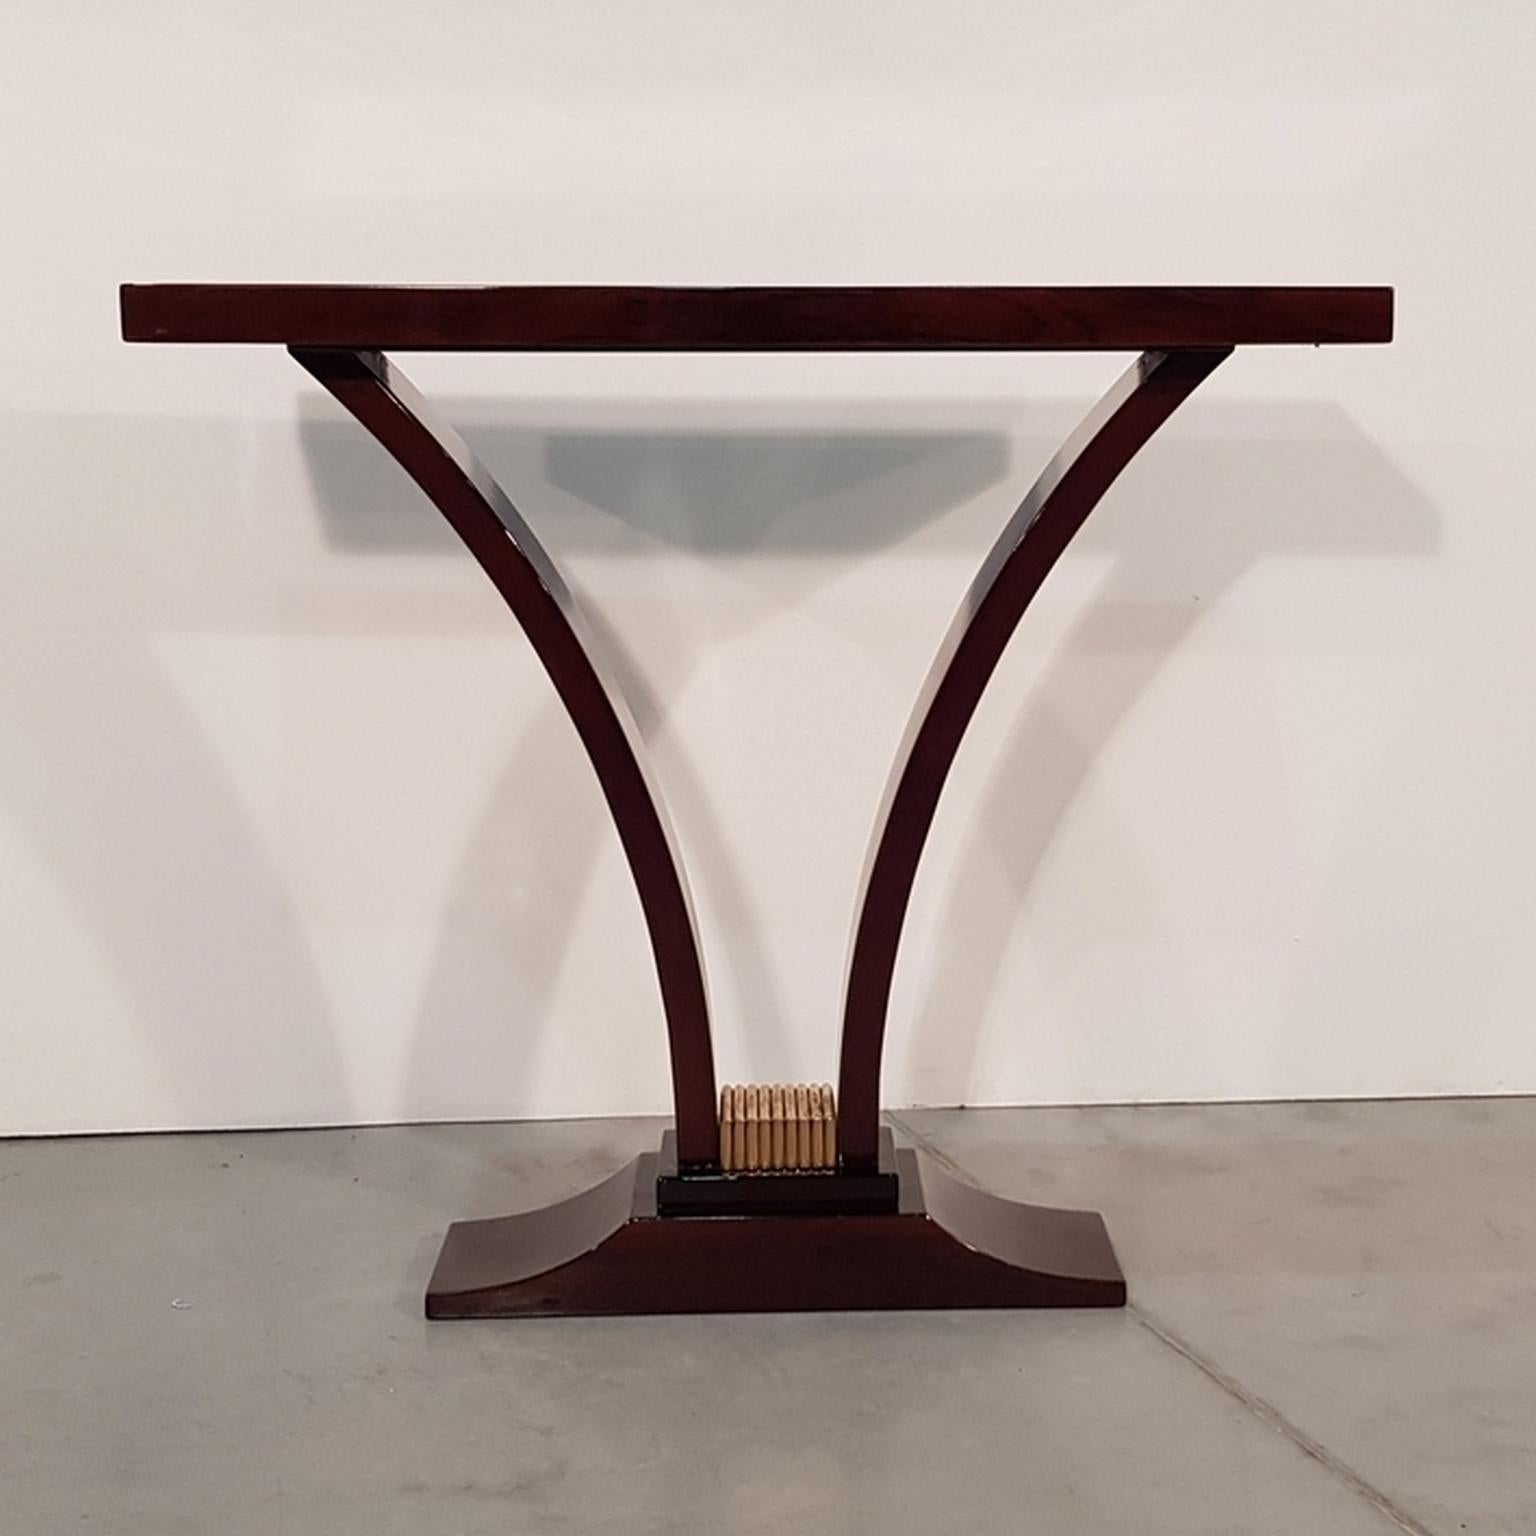 Elegant typical French Art Deco tulip-shape console with walnut veneer and brass ornament on the bottom from art deco period, France, 1930-1940.